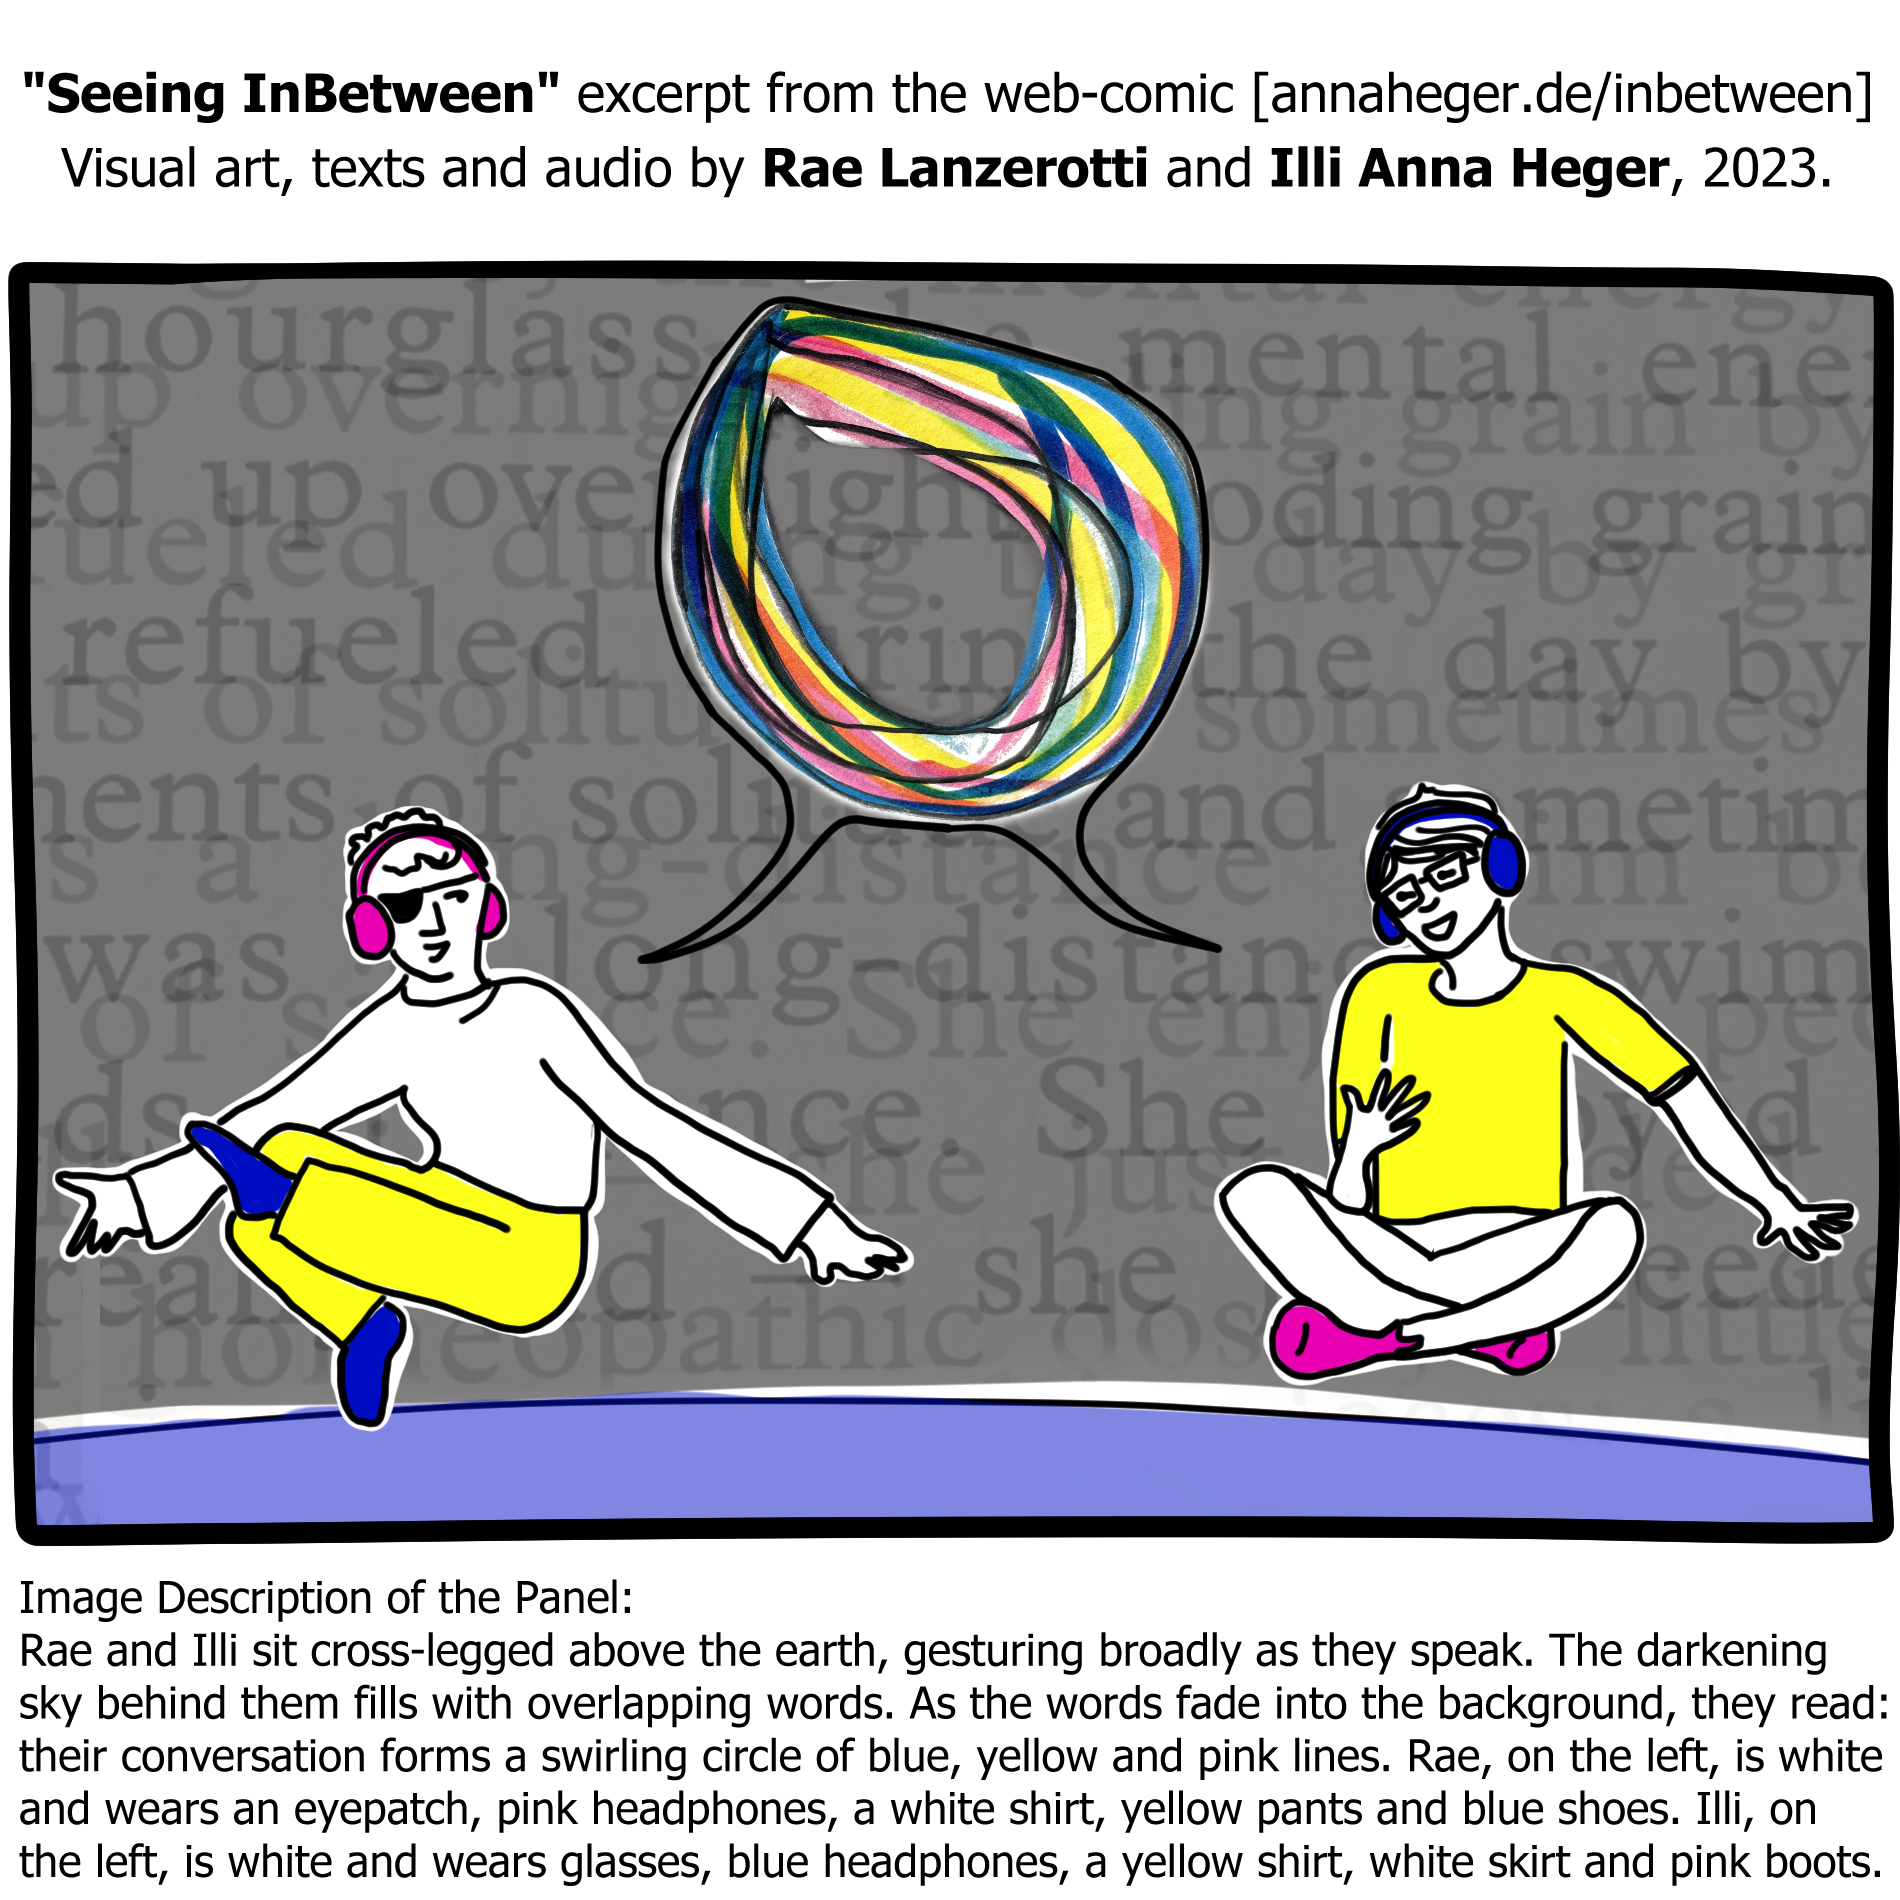 Image: Rae and Illi sit cross-legged above the earth, gesturing broadly as they speak. The darkening sky behind them fills with overlapping words. As the words fade into the background, they read: long-distance, she, refueled, up, hourglass, and other fragments. In between Illi and Rae, their conversation forms a swirling circle of blue, yellow and pink lines.
Text above: 'Seeing InBetween' excerpt from the web-comic [annaheger.de/inbetwee] Visual art, texts and audio by Rae Lanzerotti and Illi Anna Heger, 2023.
Text below: image description of the panel.